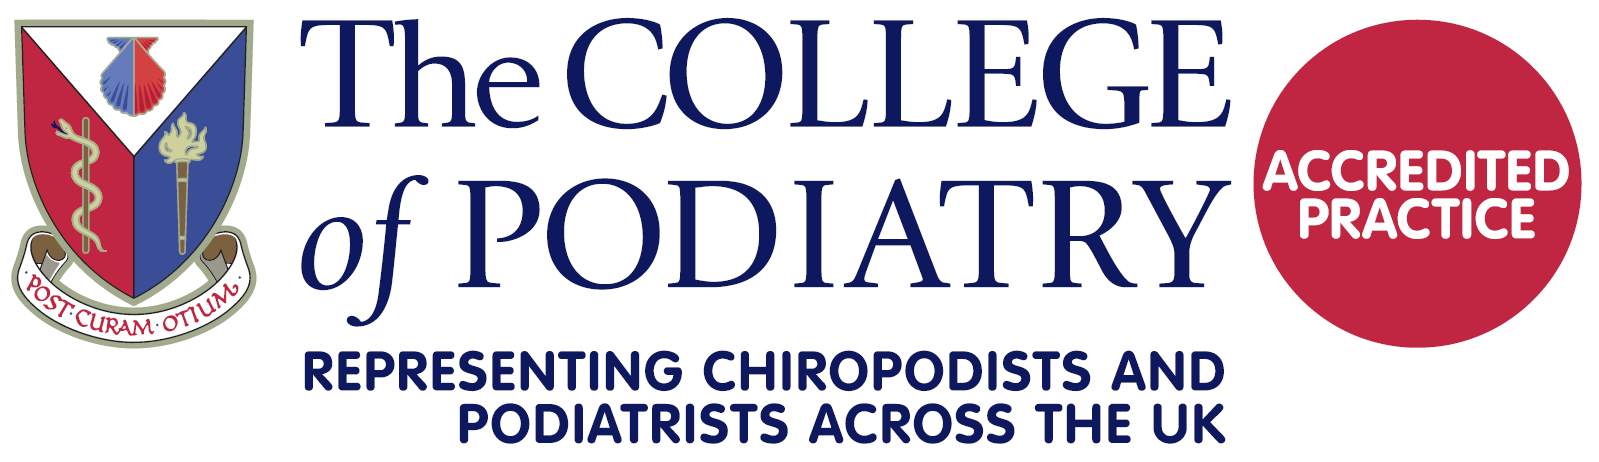 Royal College of Podiatry Accreditation